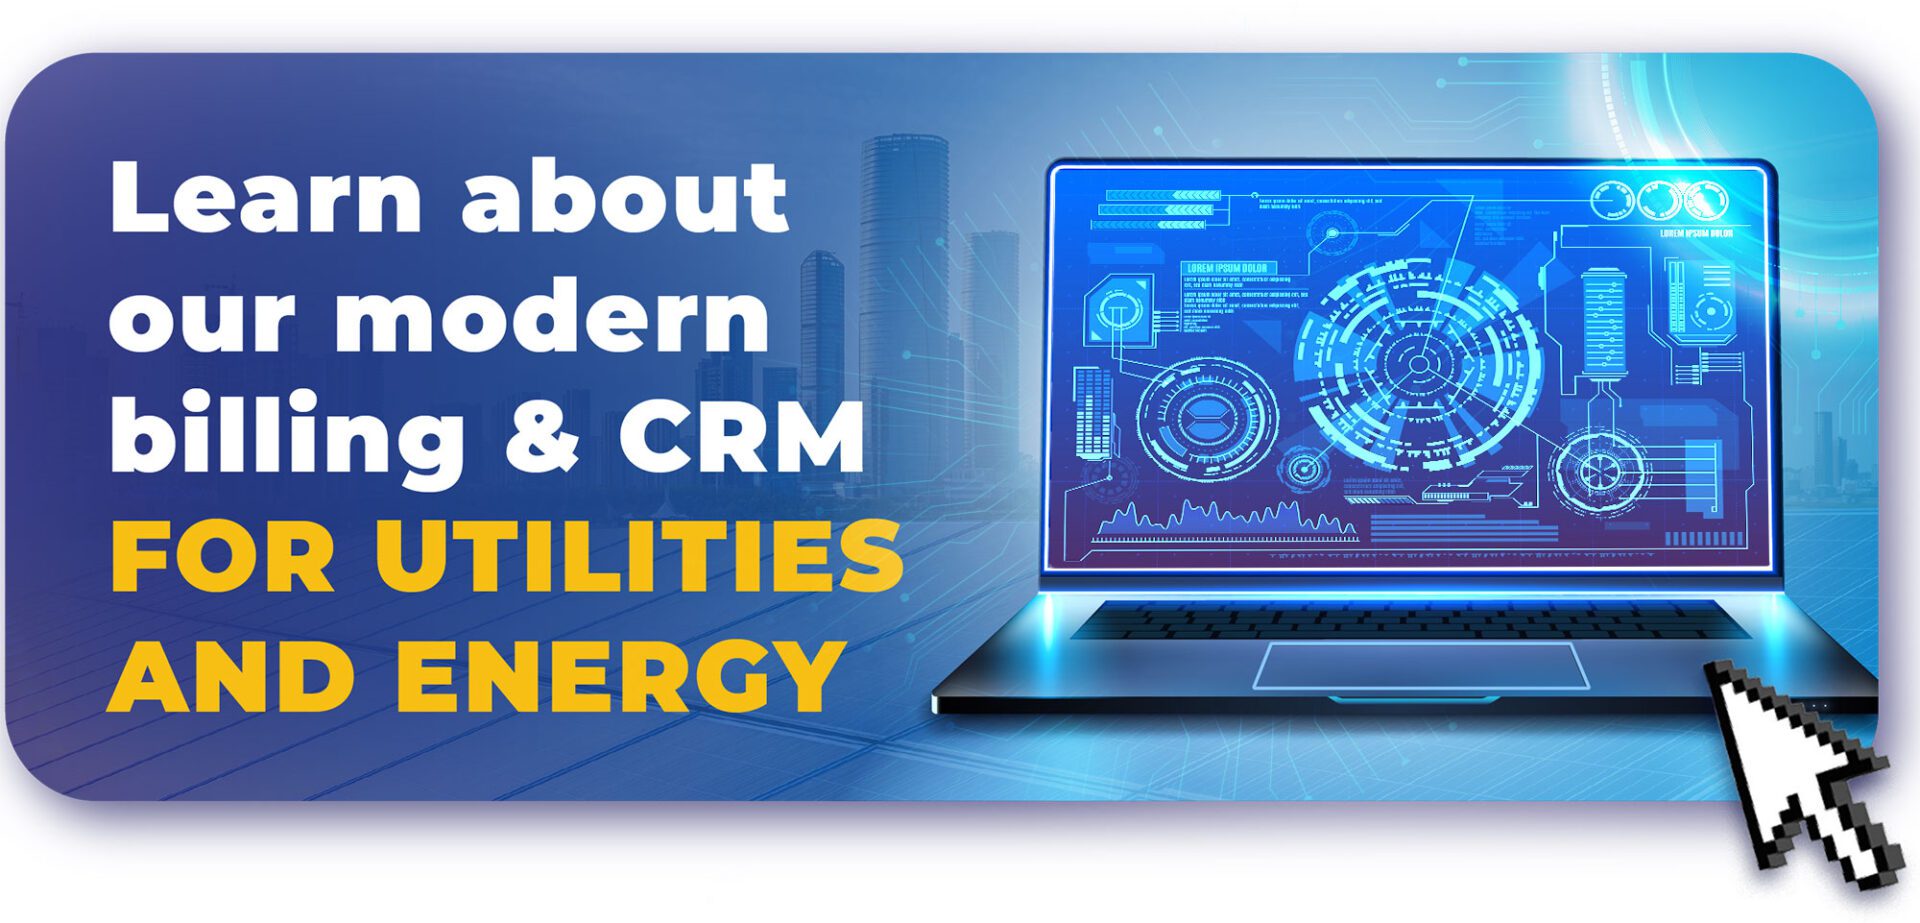 Energy & Utilities with MaxBill billing & CRM